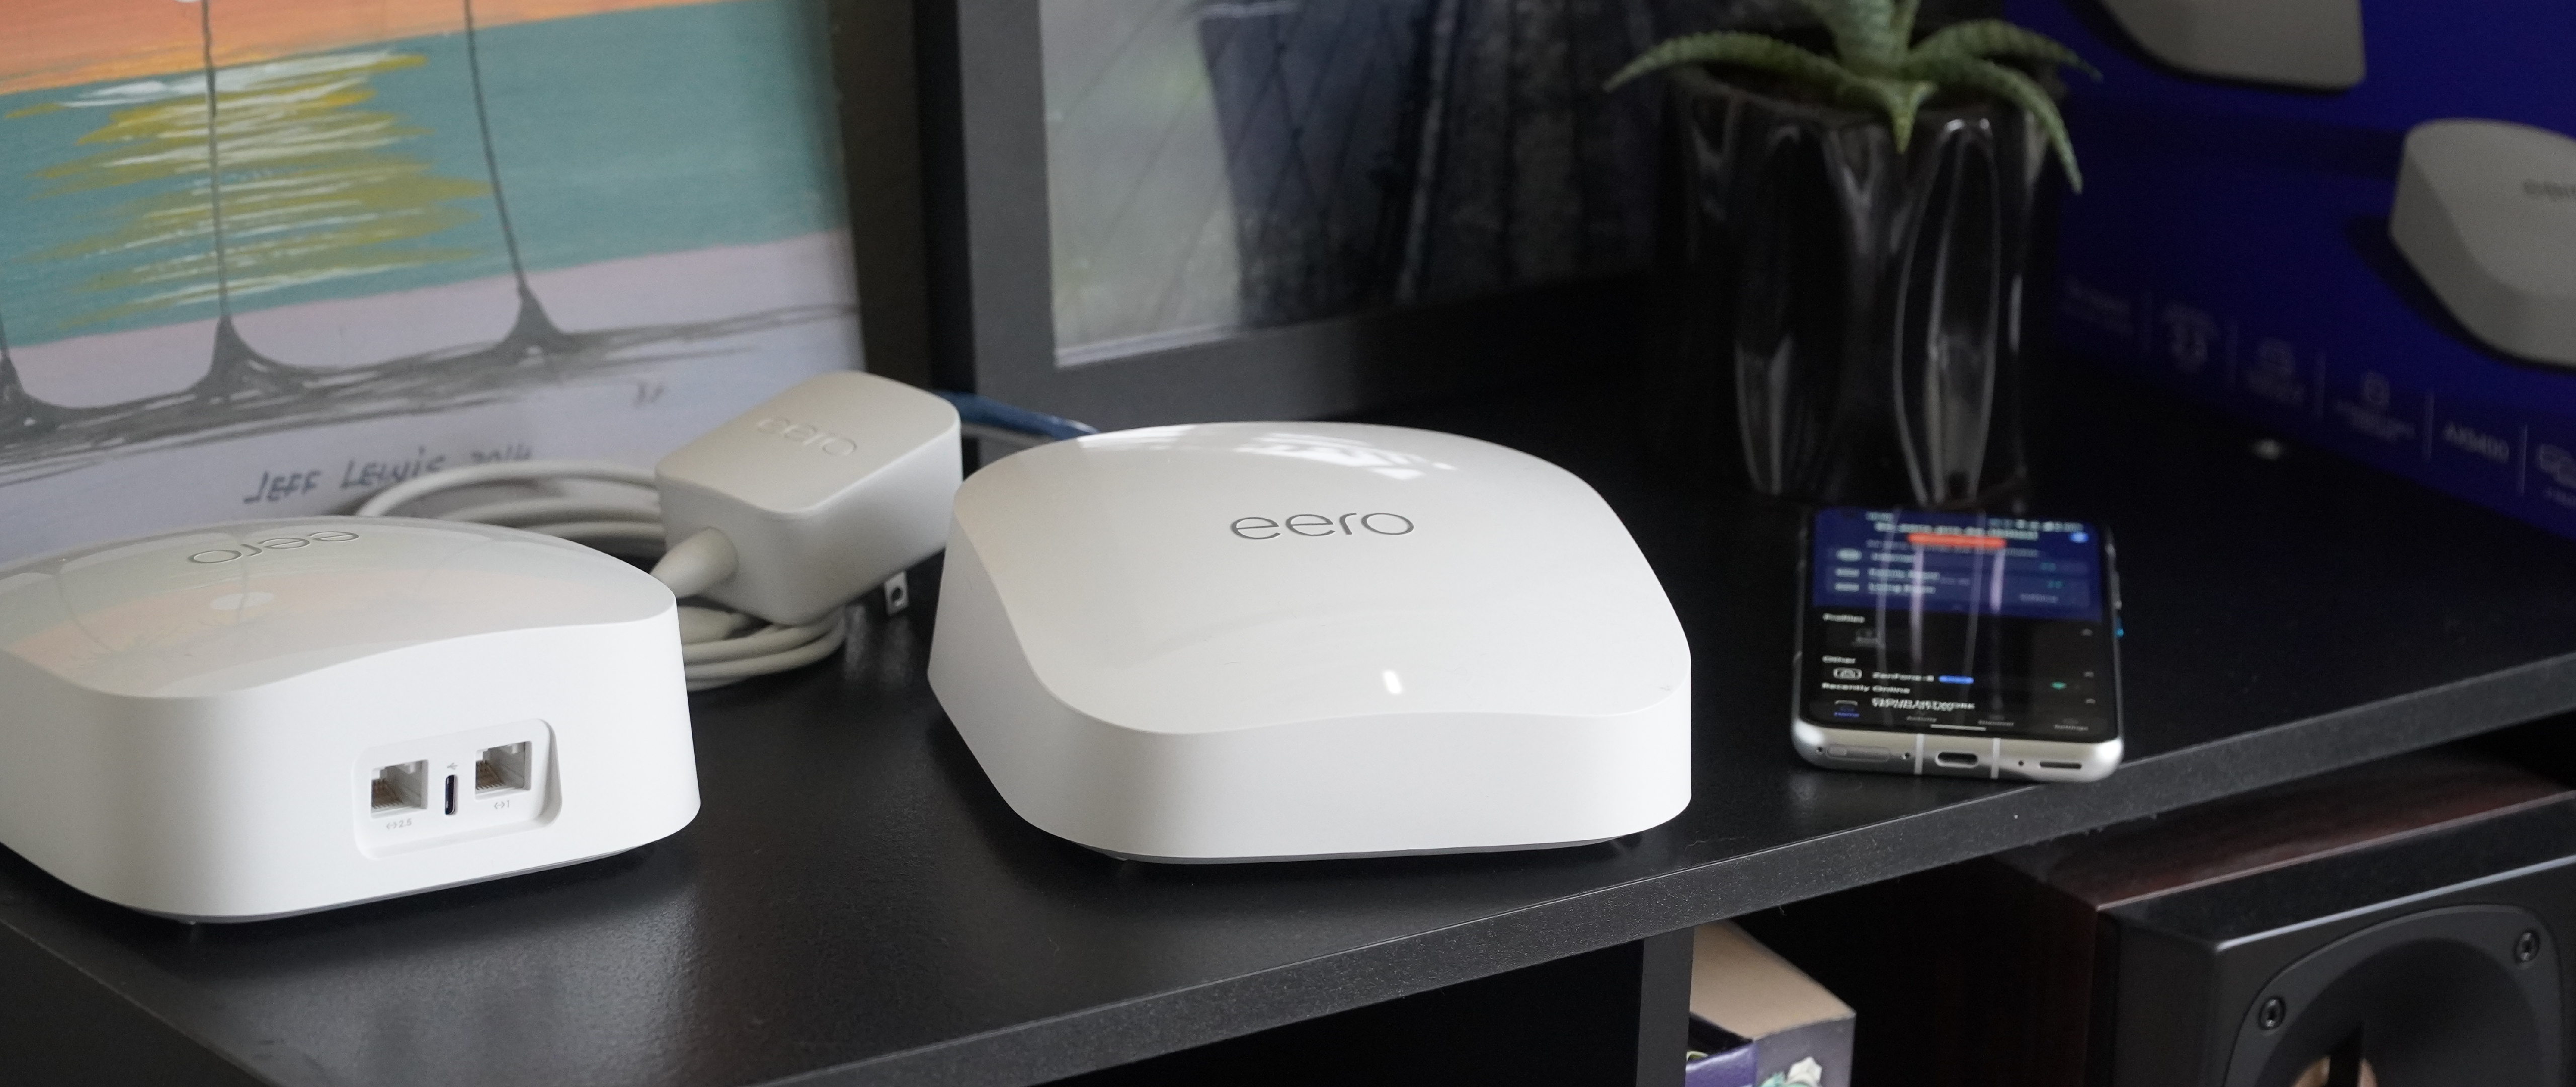 Review: Eero can fix your Wi-Fi woes